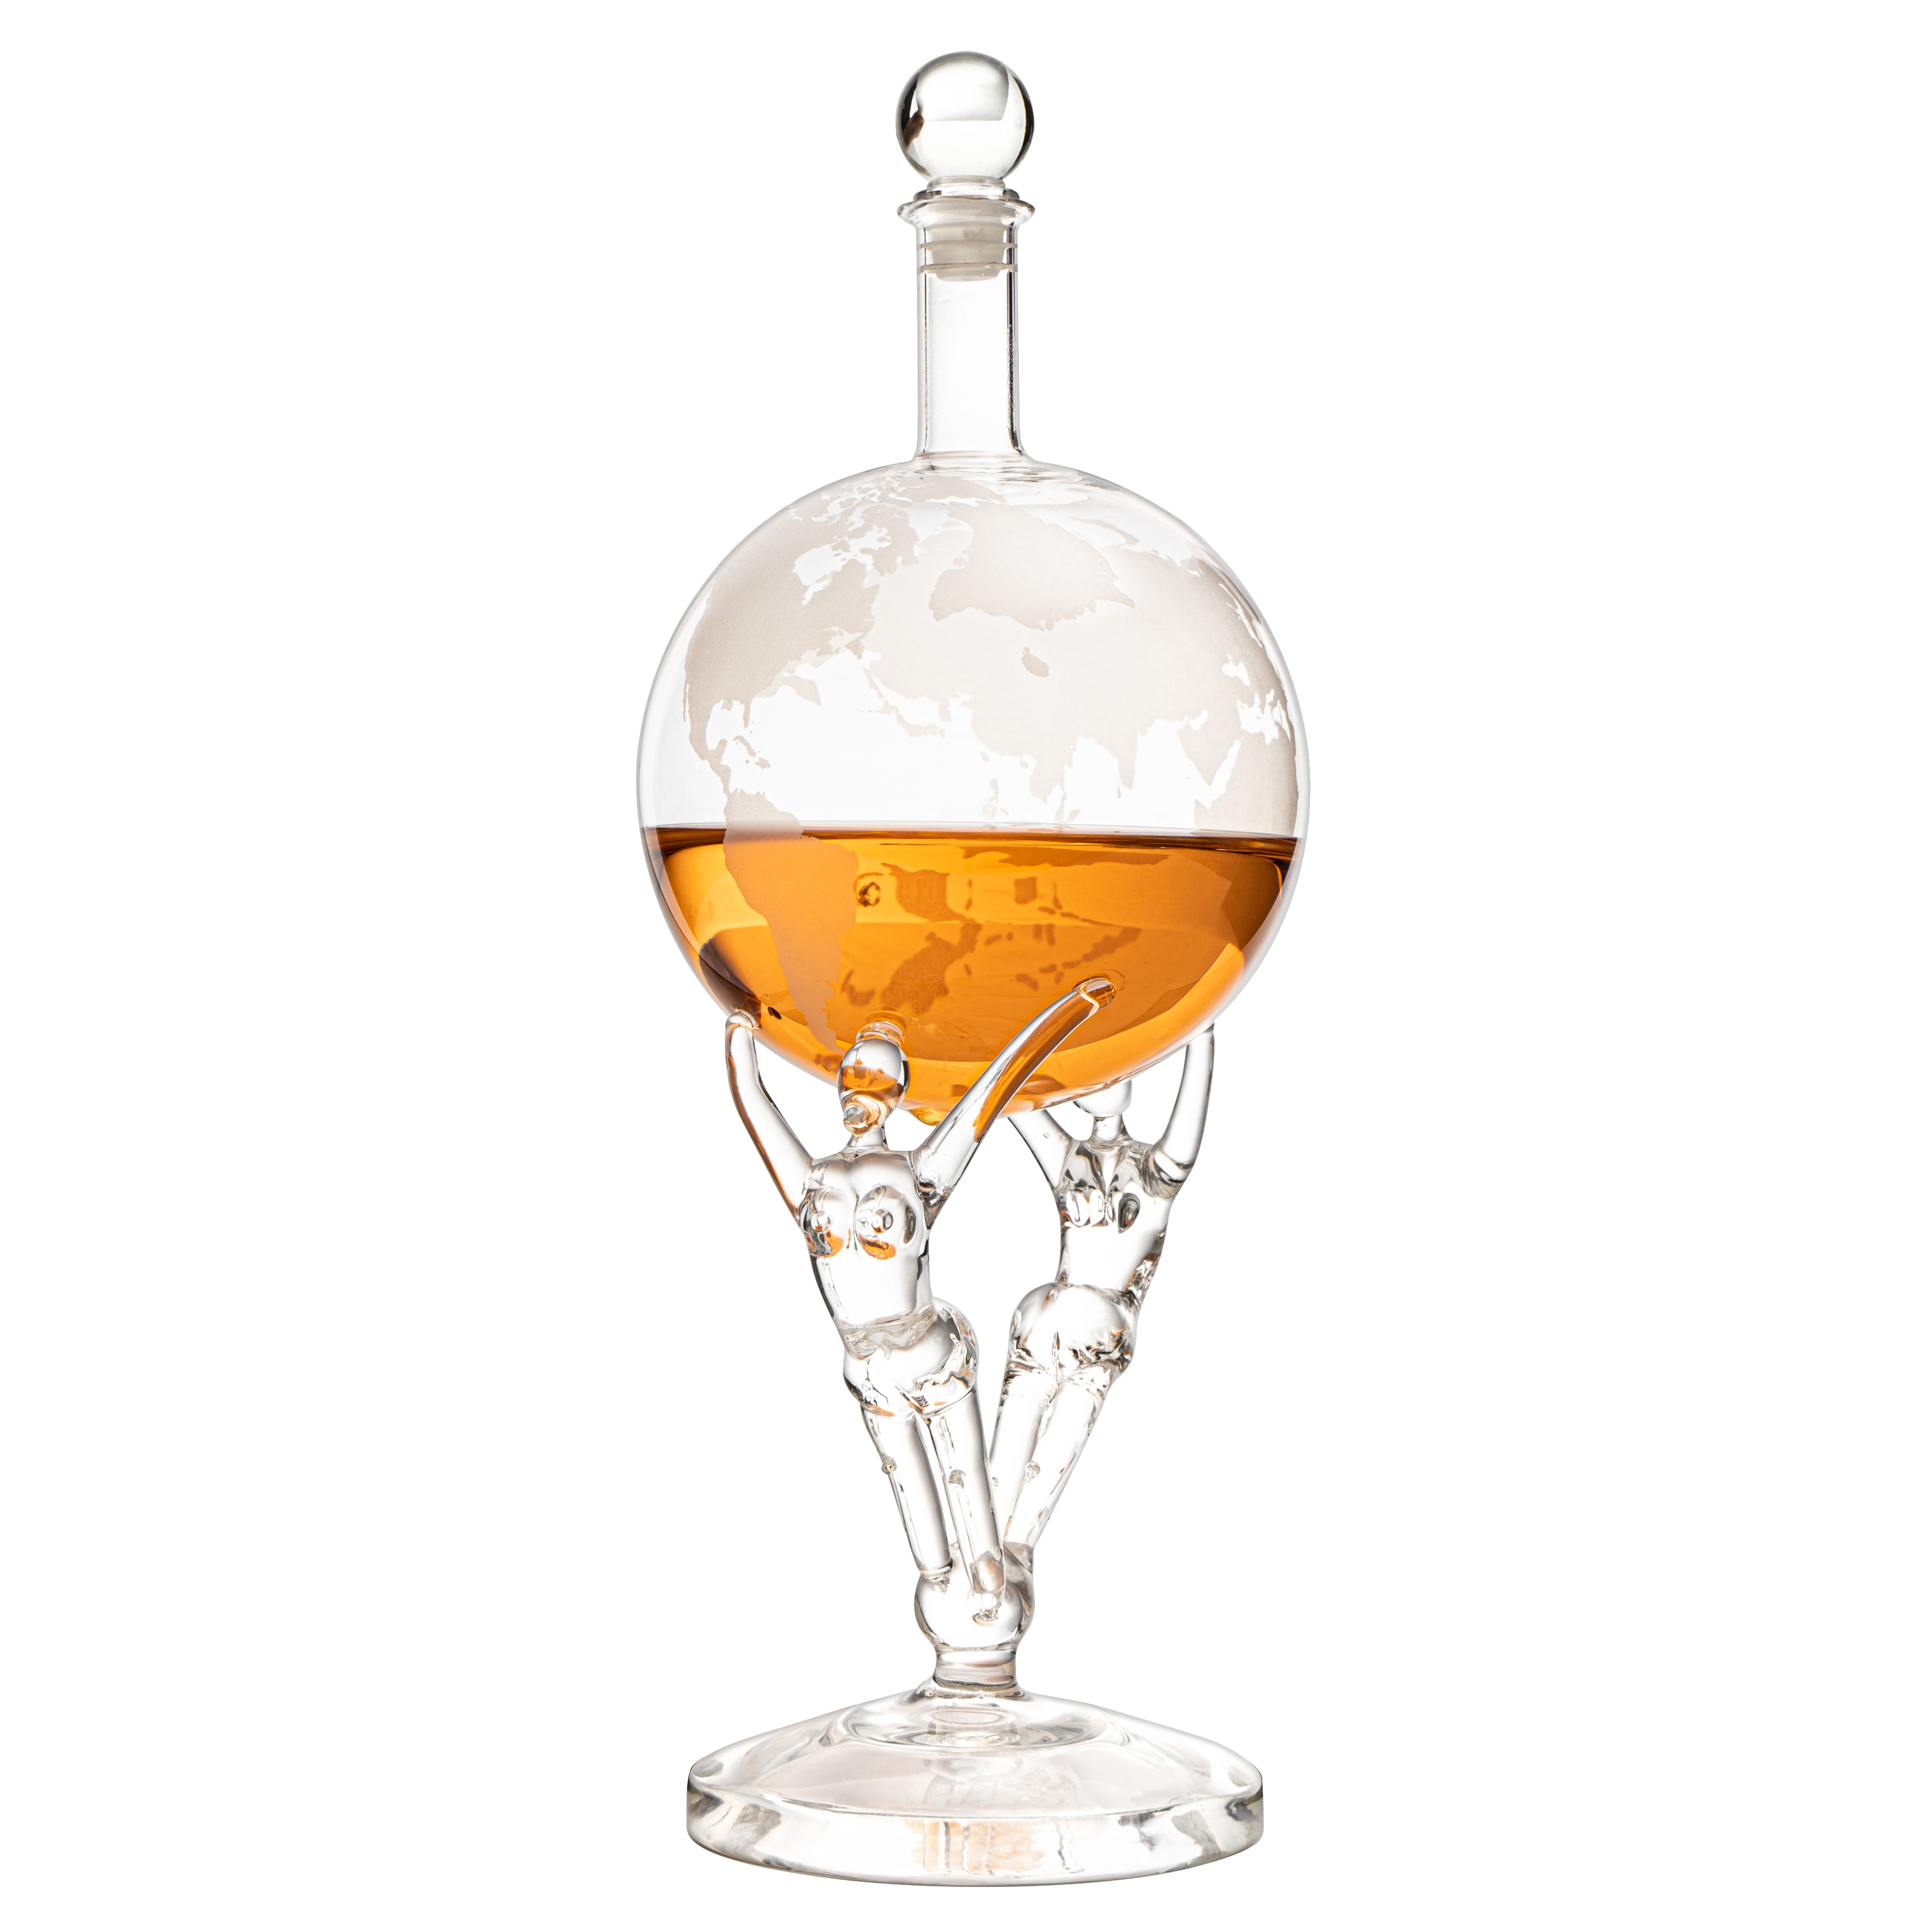 Love Crystal Decanter, For Wine & Whiskey The Wine Savant - 12